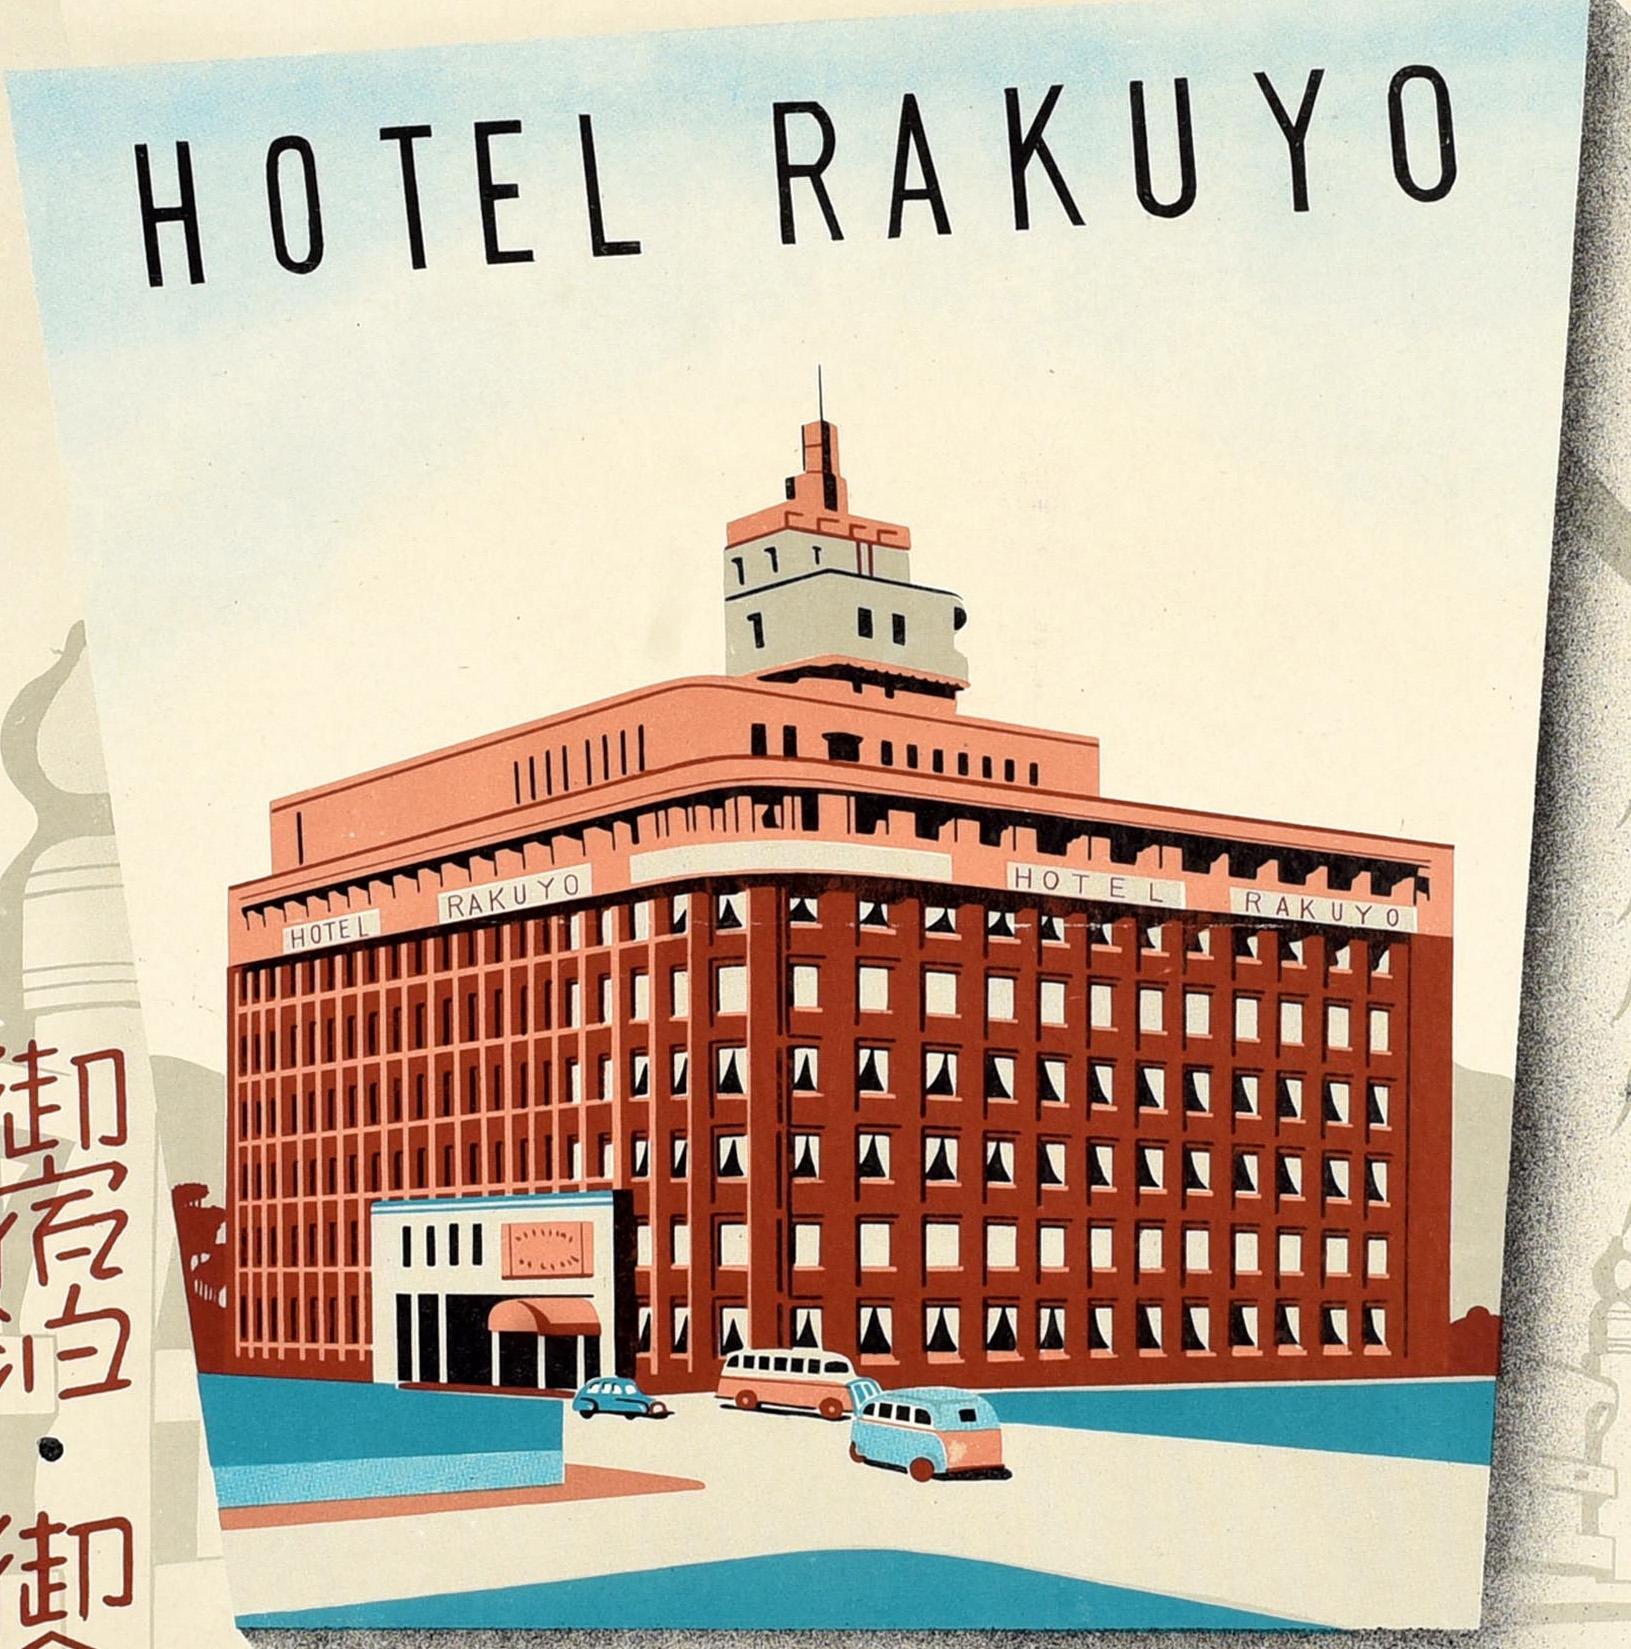 Original vintage travel poster advertising Hotel Rakuyo In front of Kyoto Station featuring an illustration of the hotel with cars and buses parked outside, the bold title text and information in Japanese around the image with details that the hotel